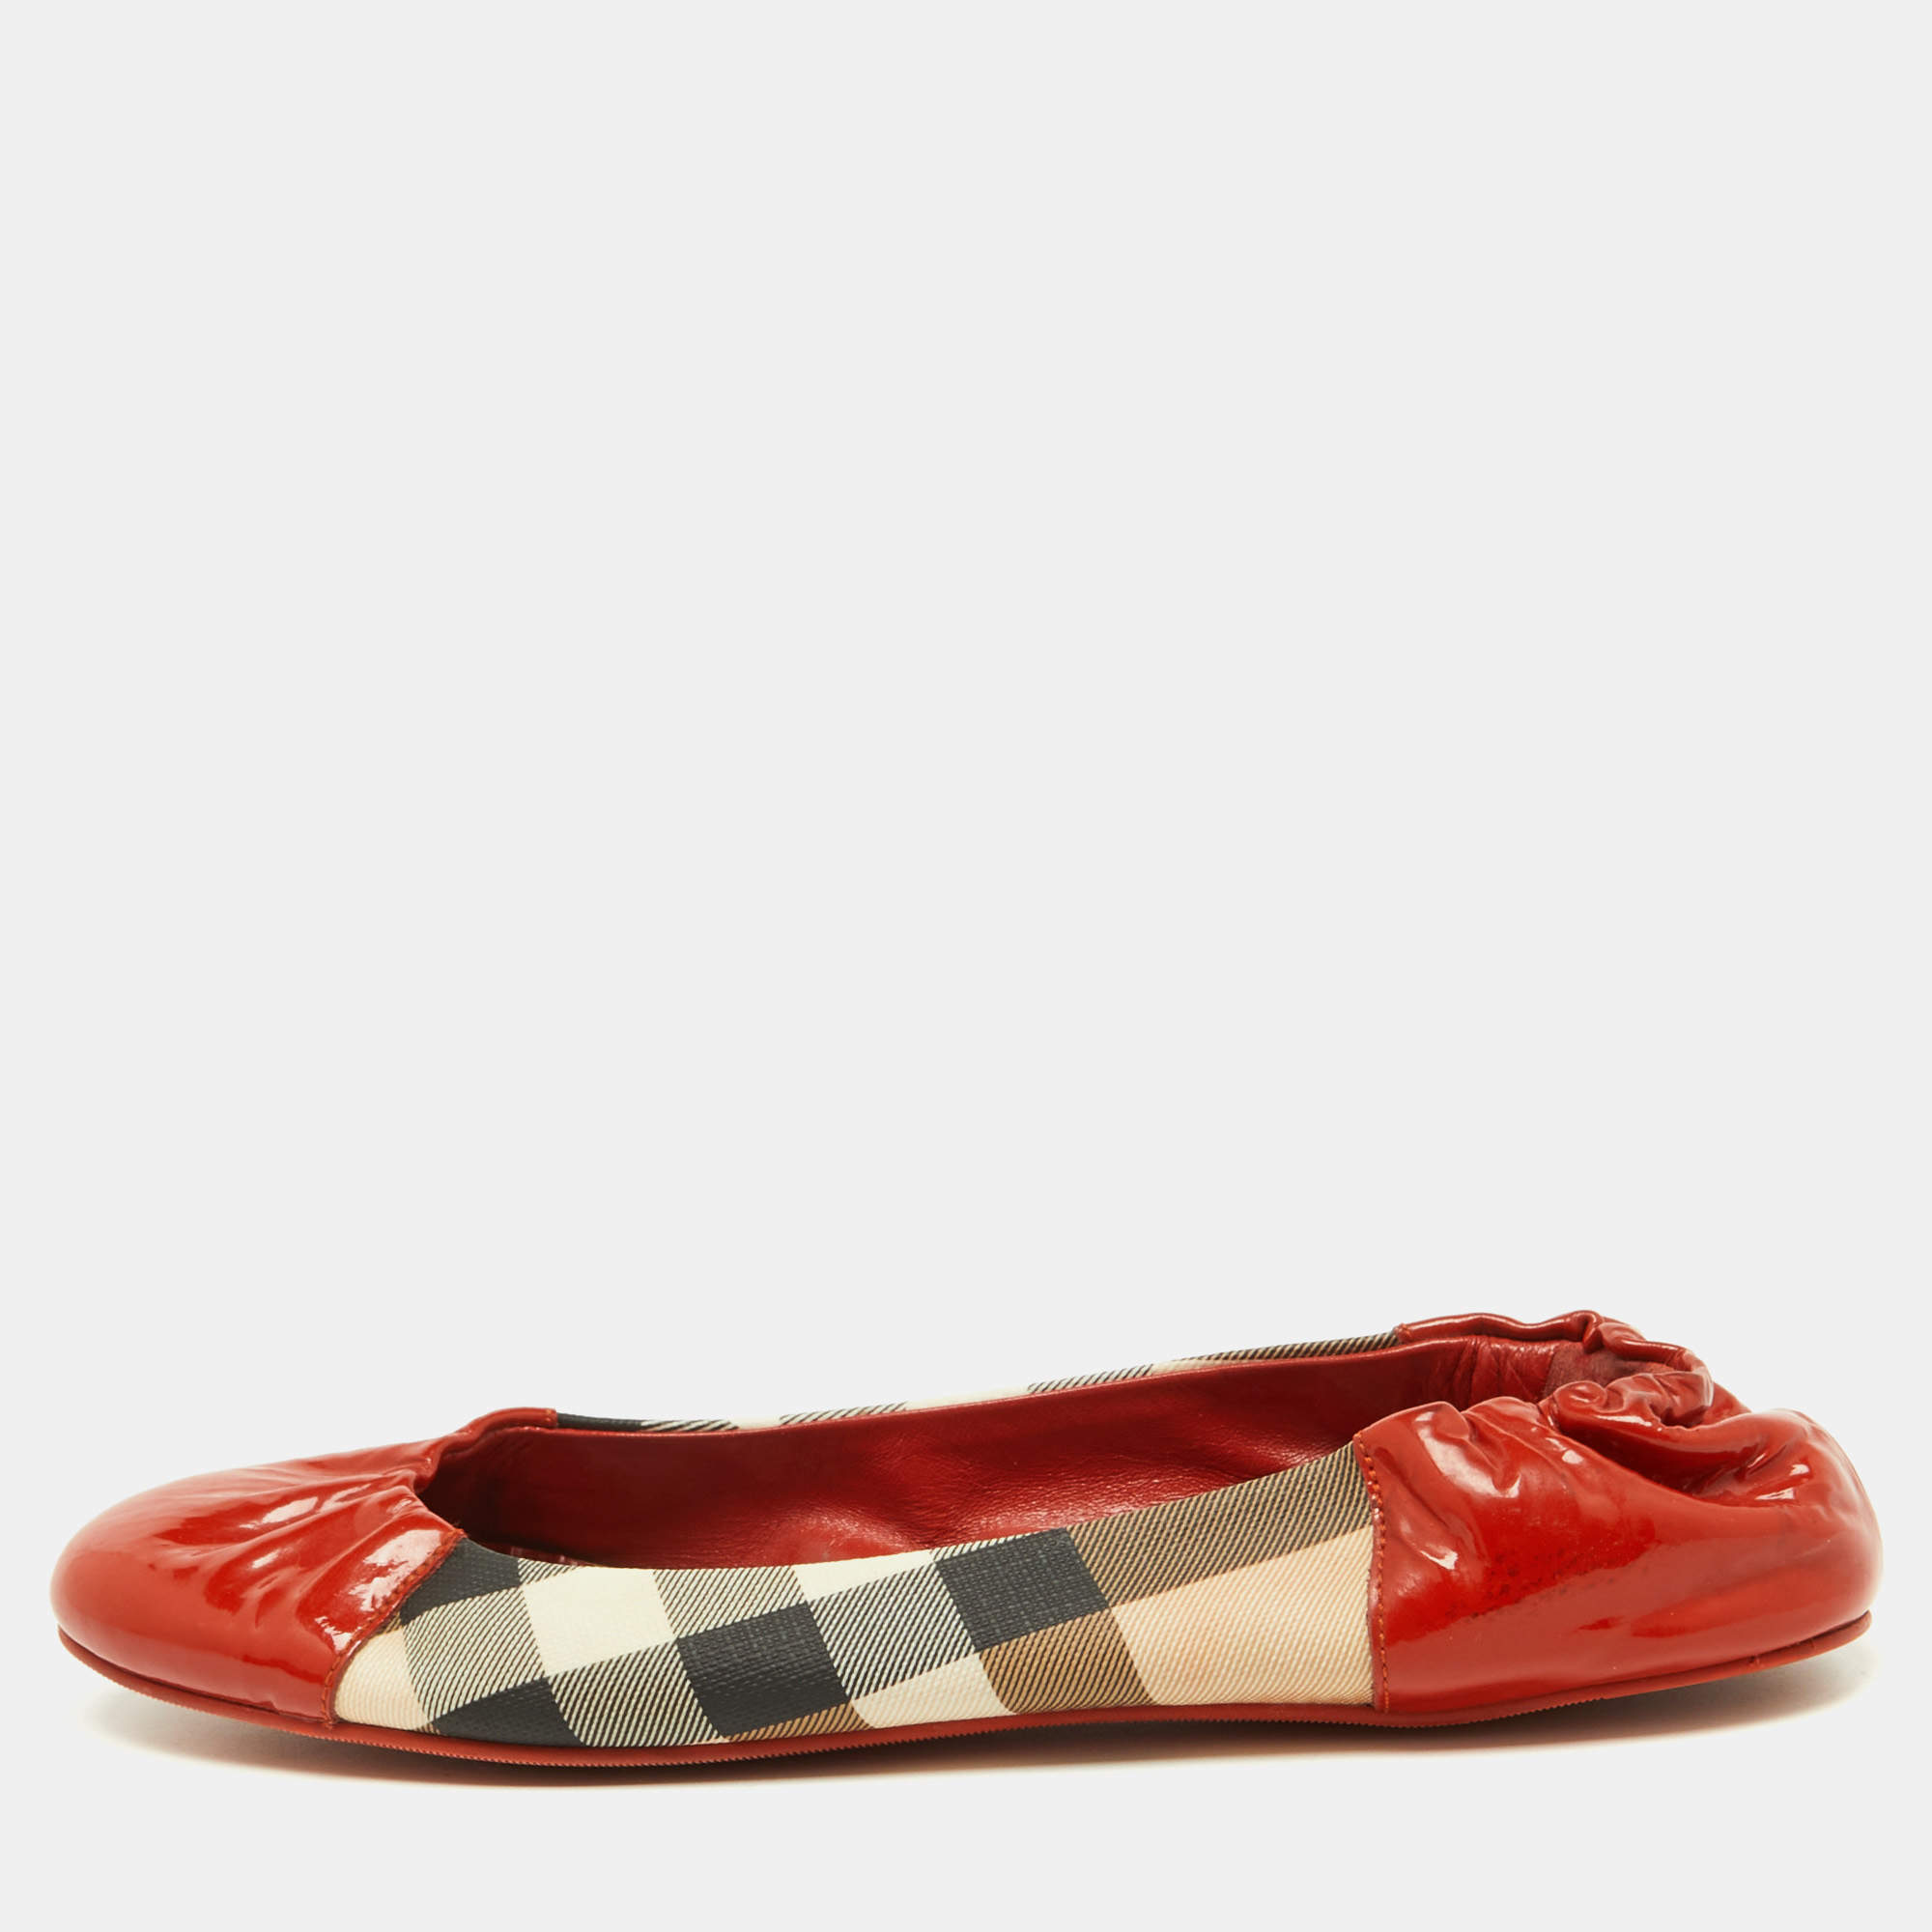 Burberry Orange/Beige Patent Leather and Nova Check Coated Canvas Scrunch Ballet Flats Size 39.5